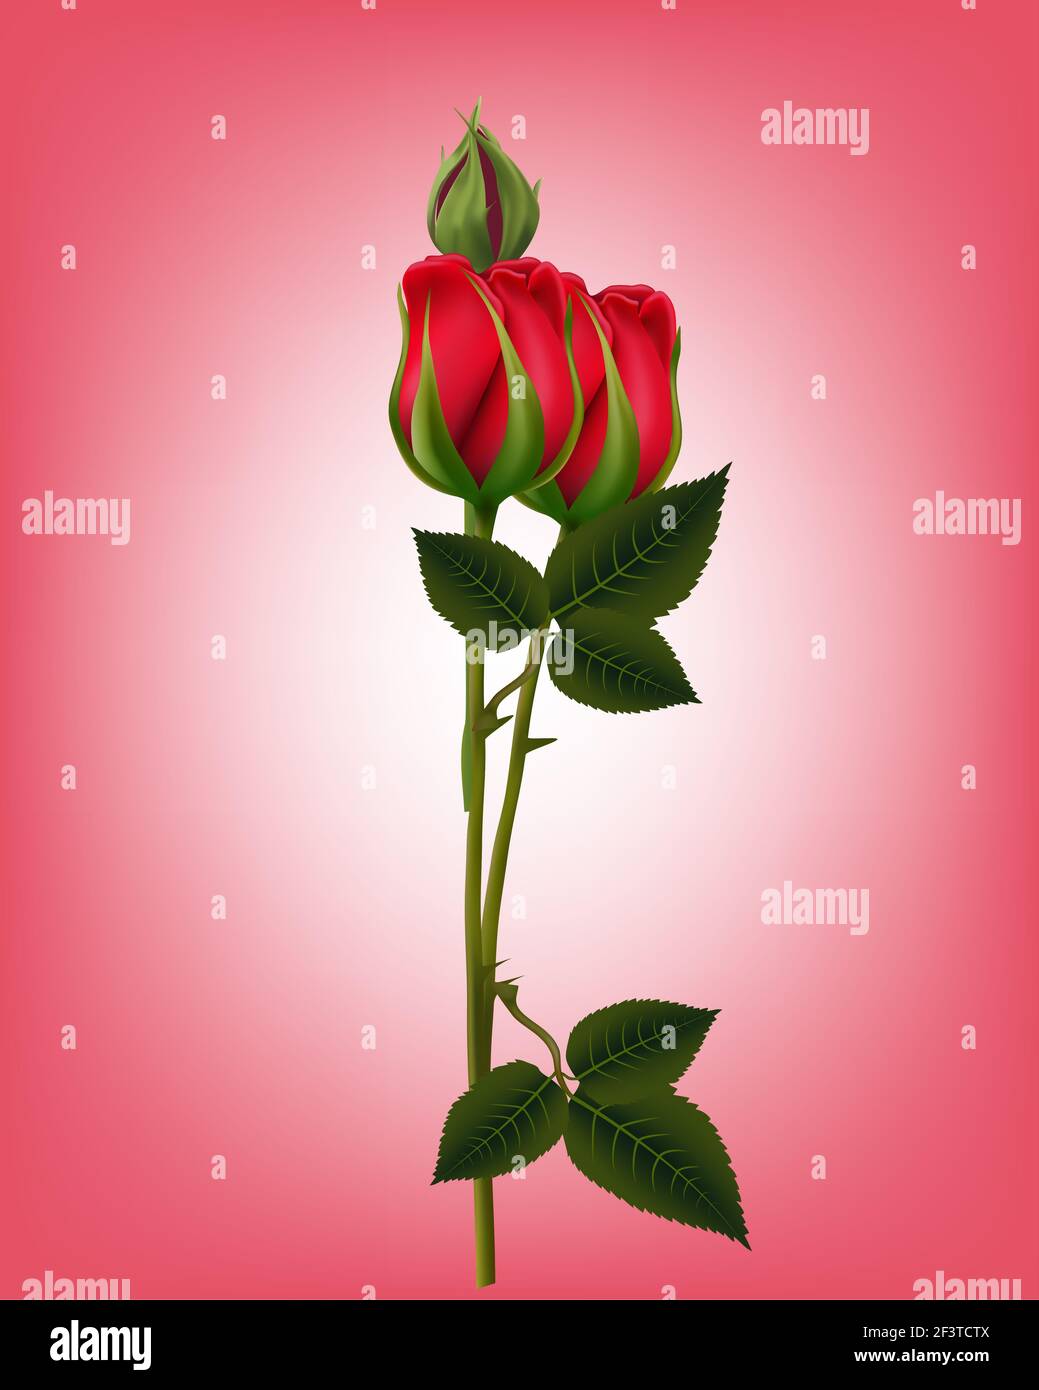 3d illustration of red rose for mother's day Stock Photo